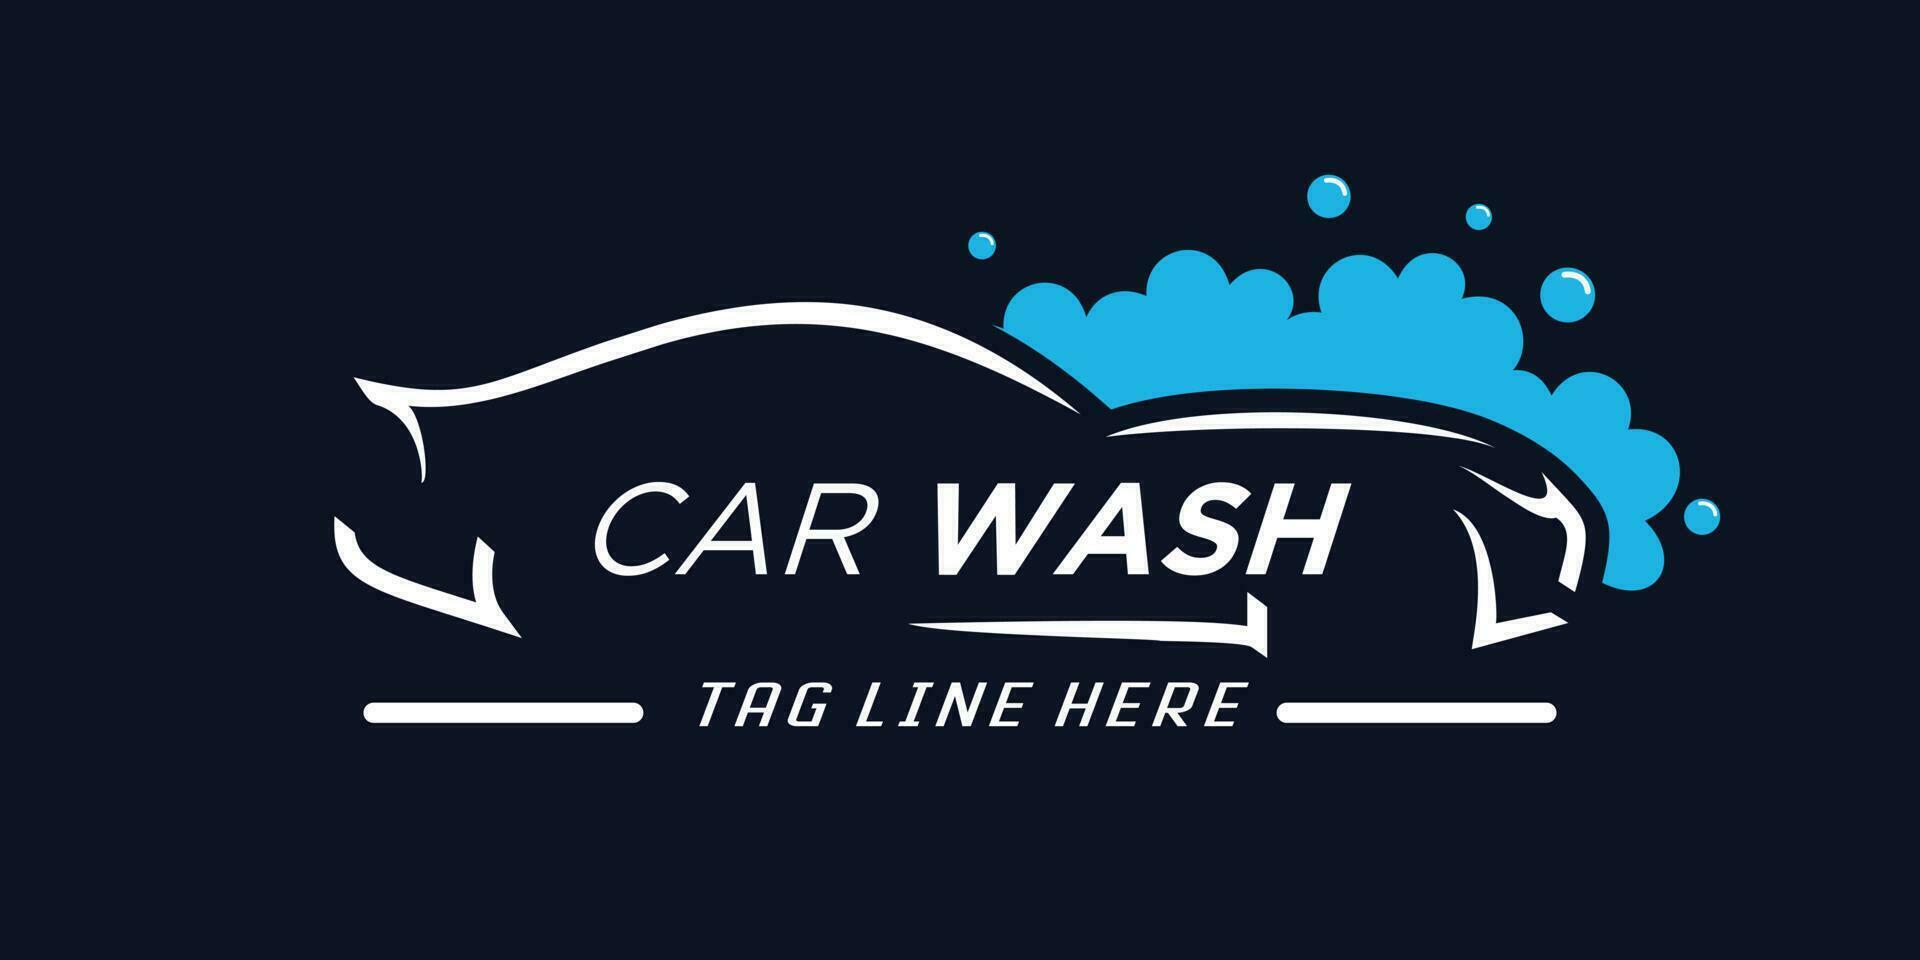 Automotive wash or car wash logo with creative car shape and bubble design vector